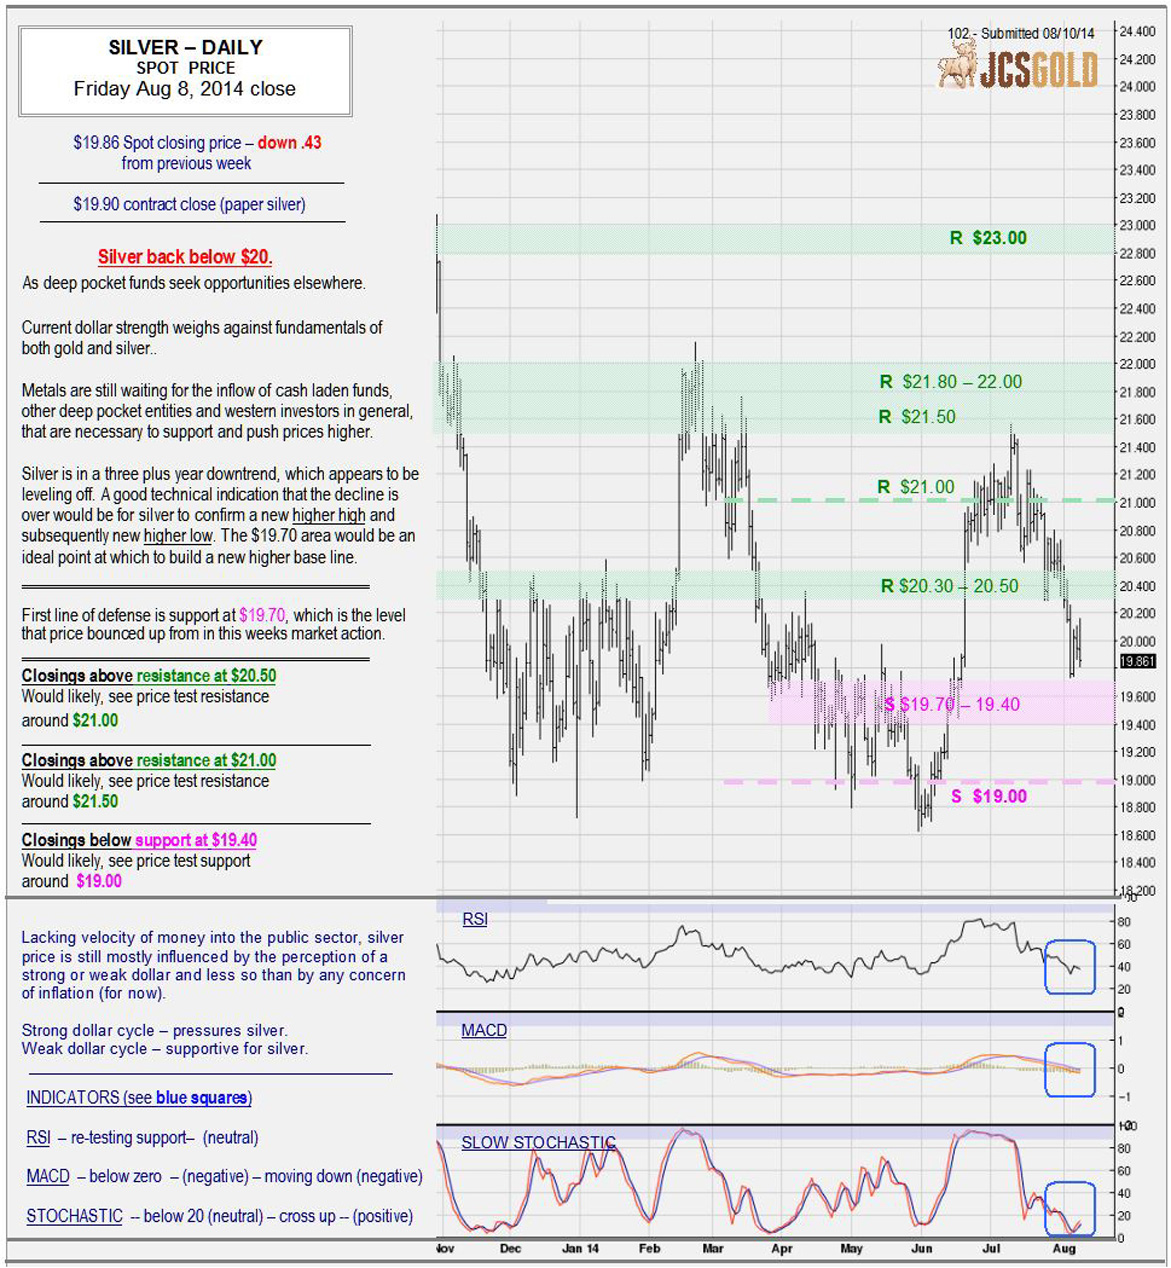 Aug 8, 2014 chart & commentary